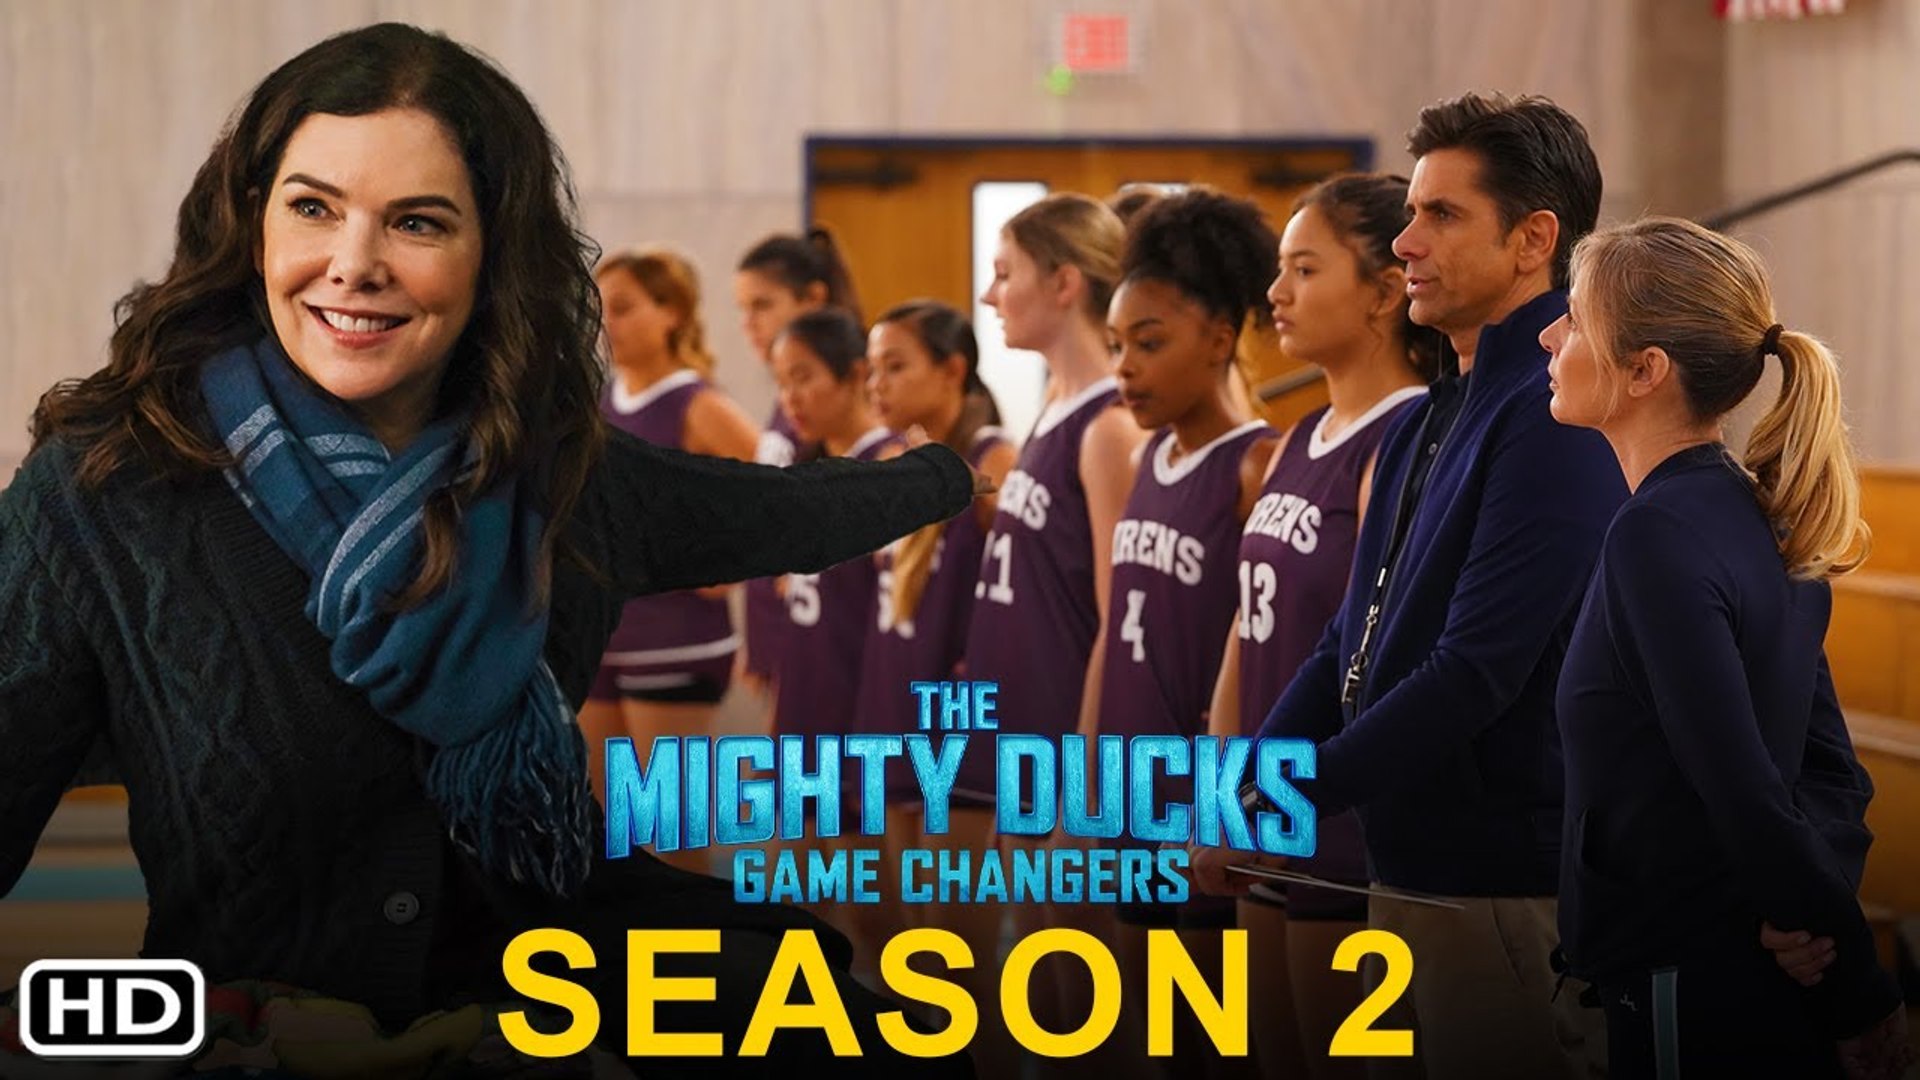 The Mighty Ducks Game Changers Season 2 Trailer (2022) - Disney+, Release  Date, Episode 1, Review - video Dailymotion